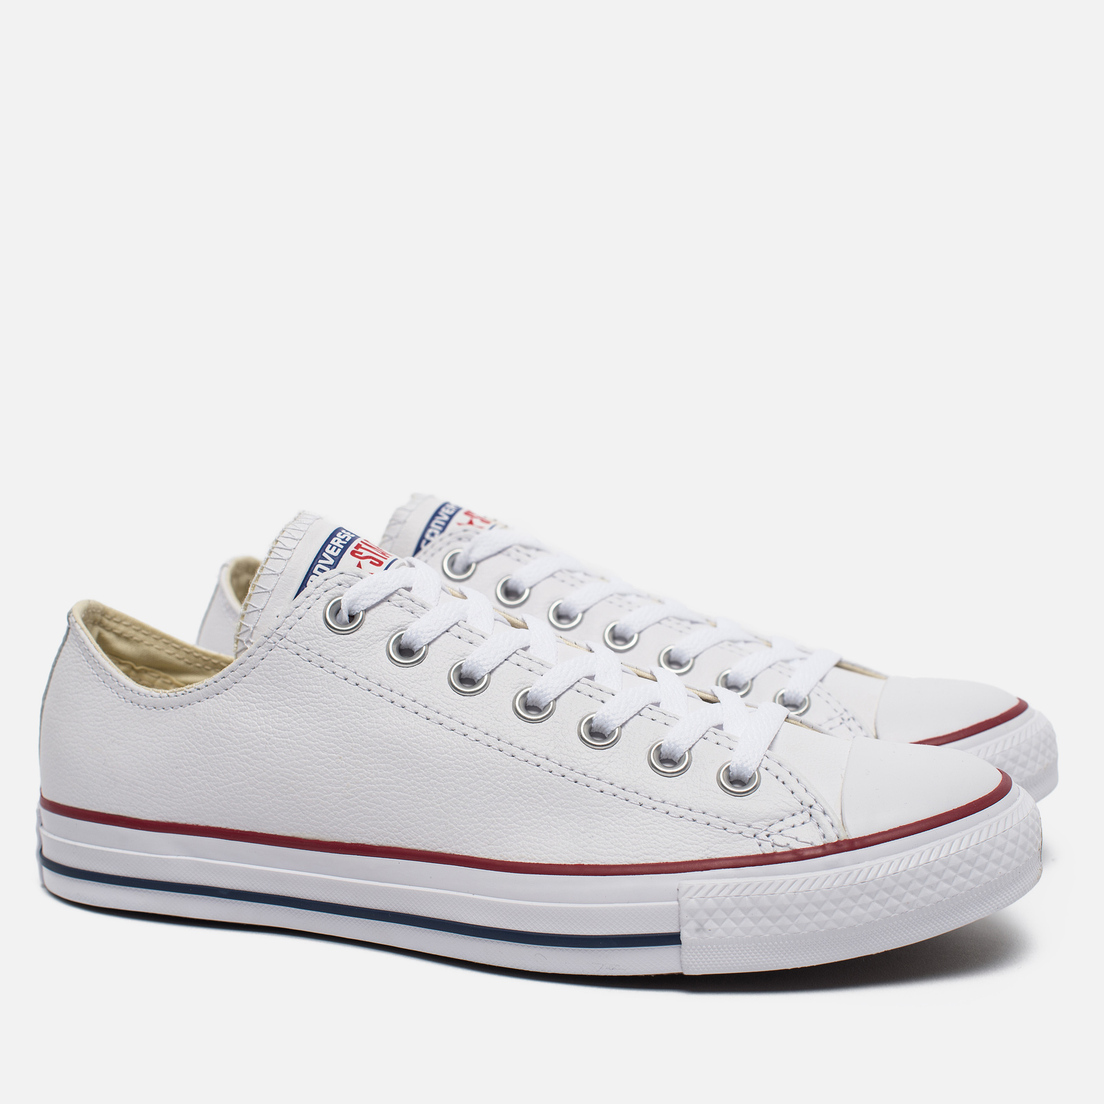 converse all star white leather